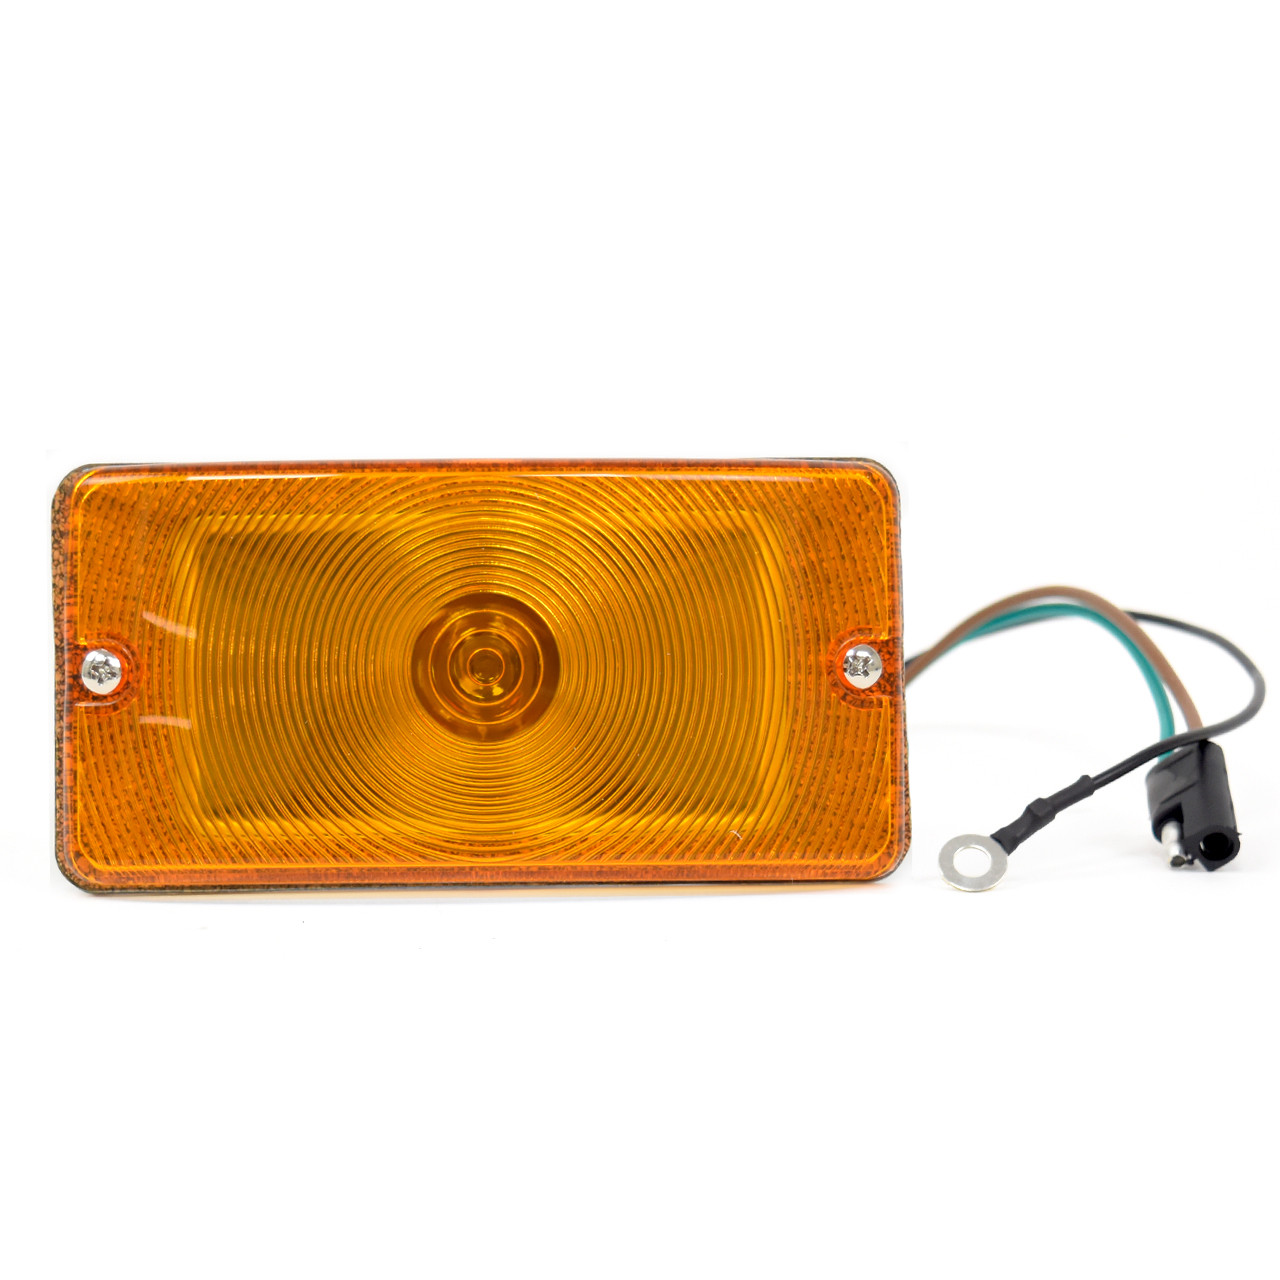 Turn Signal Parking Light Assembly With Amber Lens Fits LH or RH [FB-BP002]